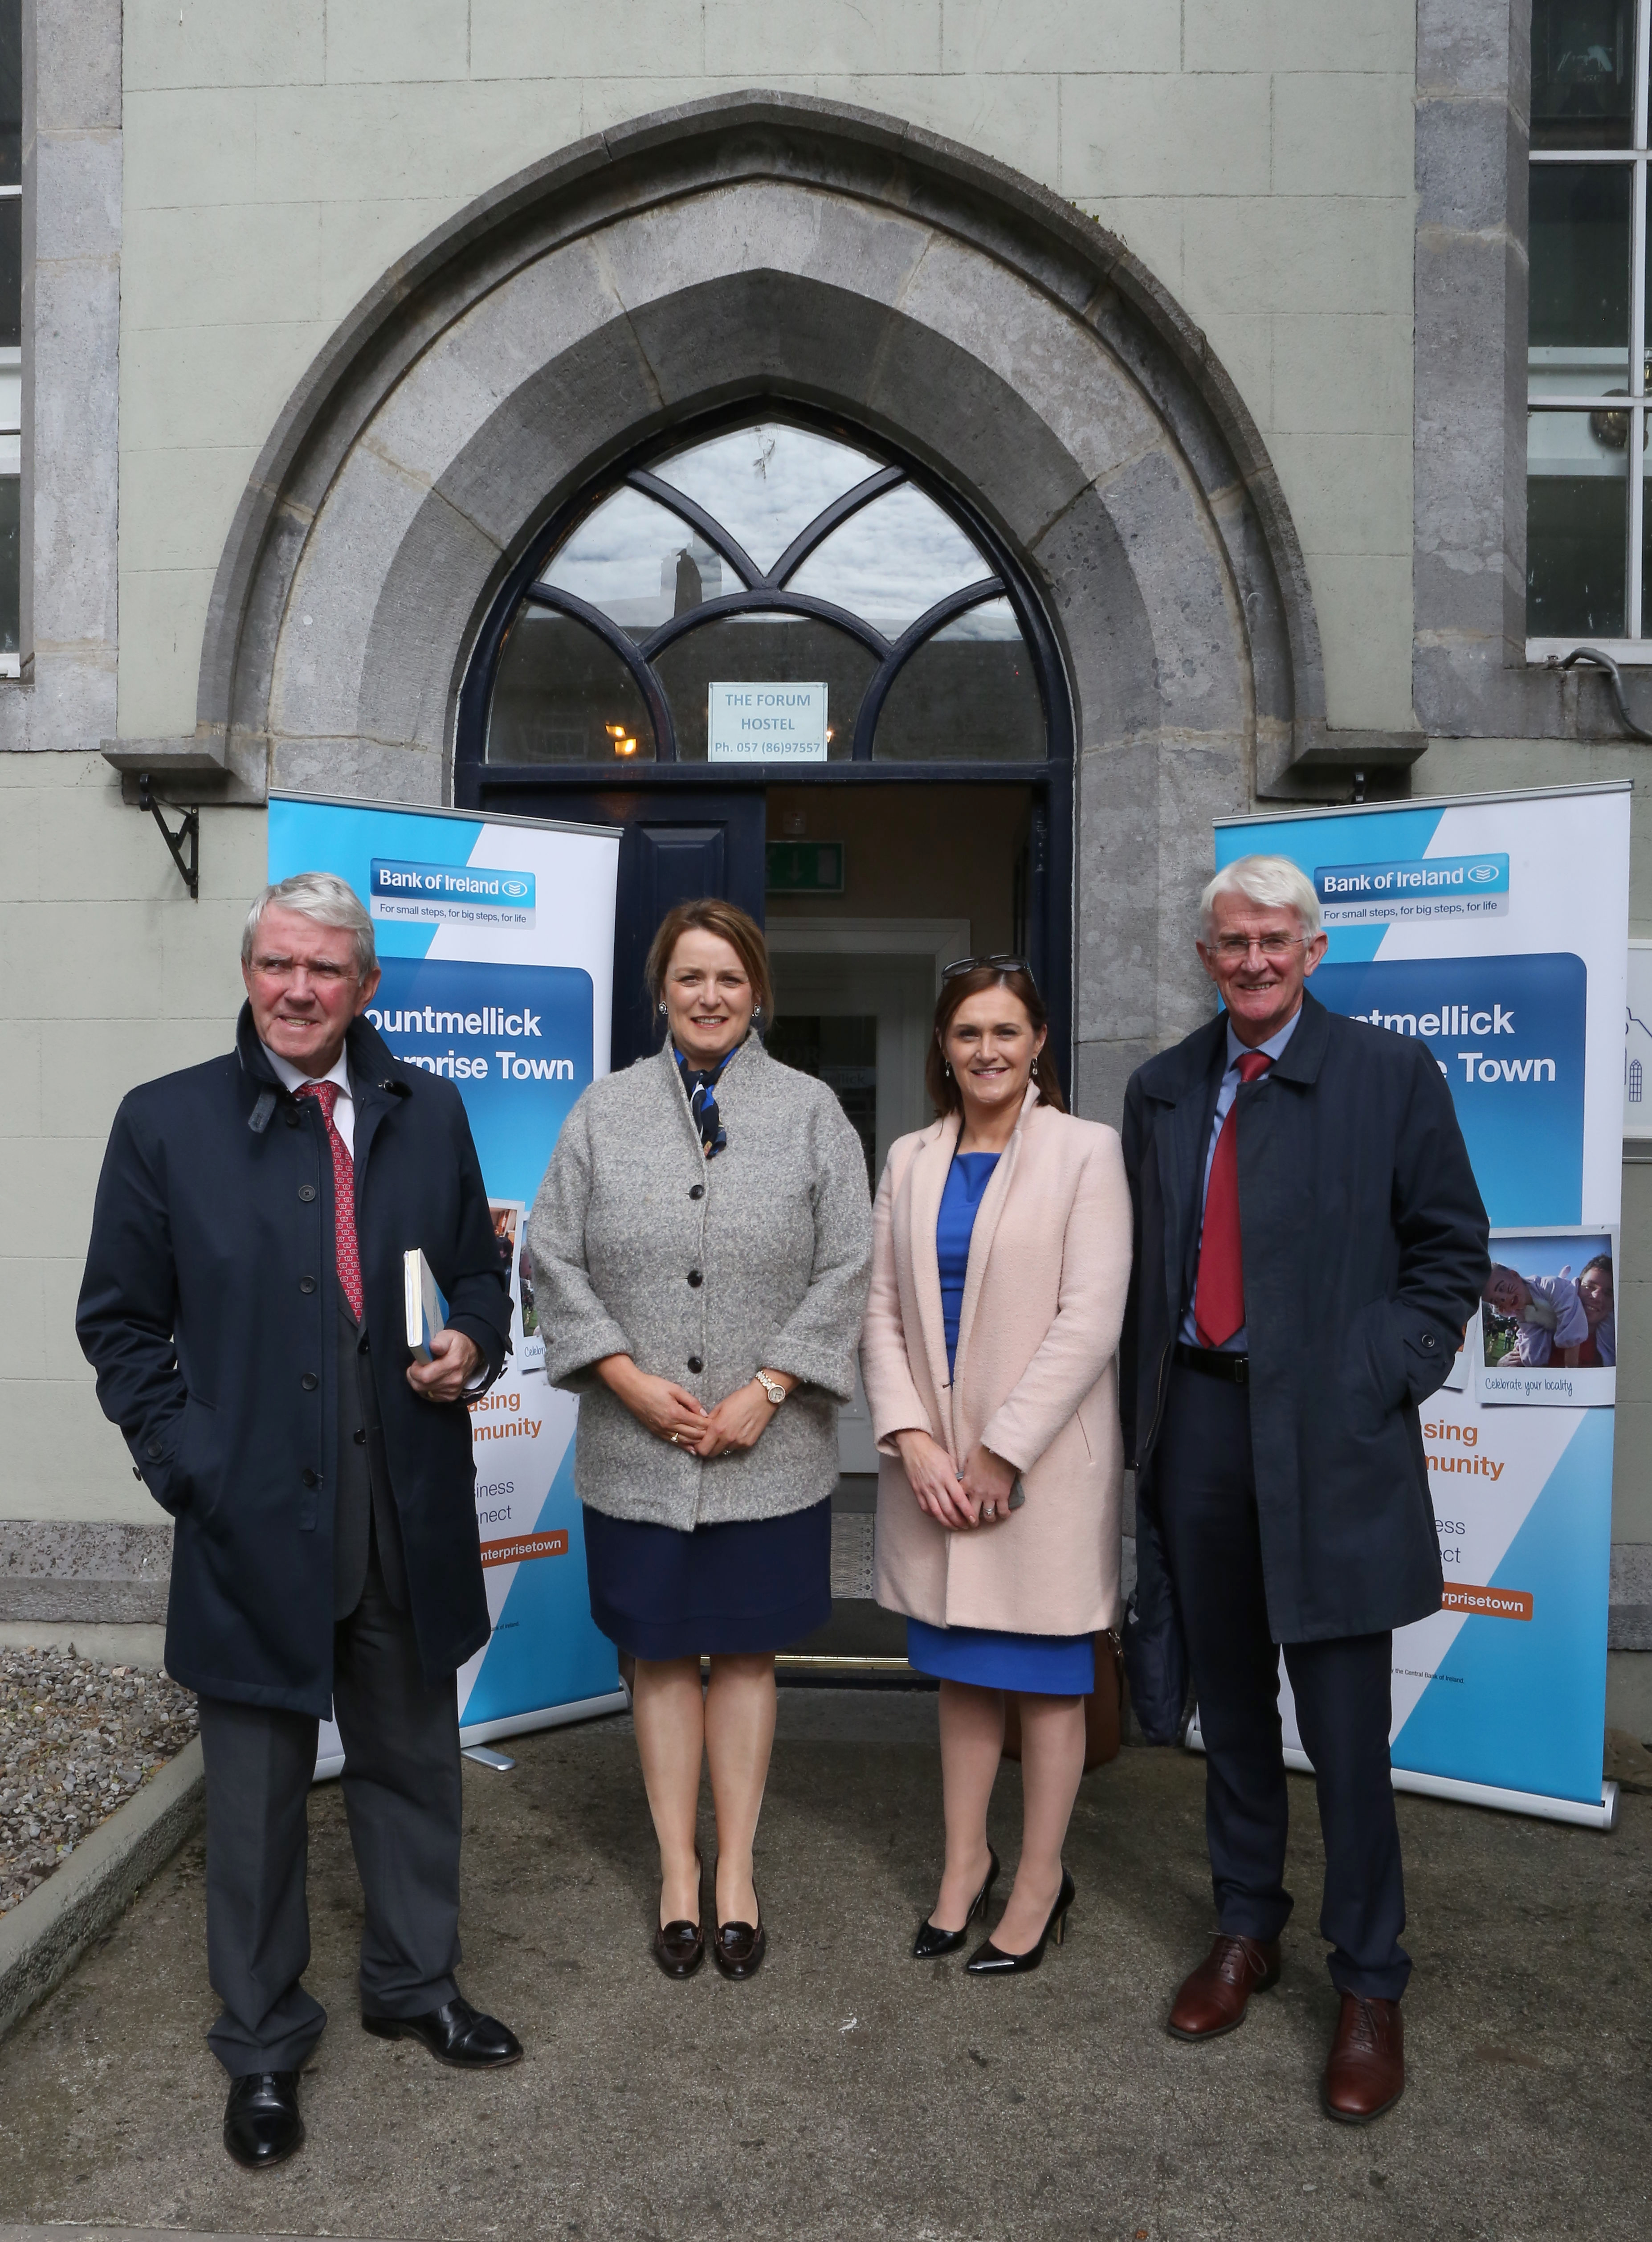 Judges are welcomed by Maria Harris L to R: Eddie Breen (Judge), Maeve Lalor (Judge), Maria Harris (Bank of Ireland), Tom Dowling (Judge).